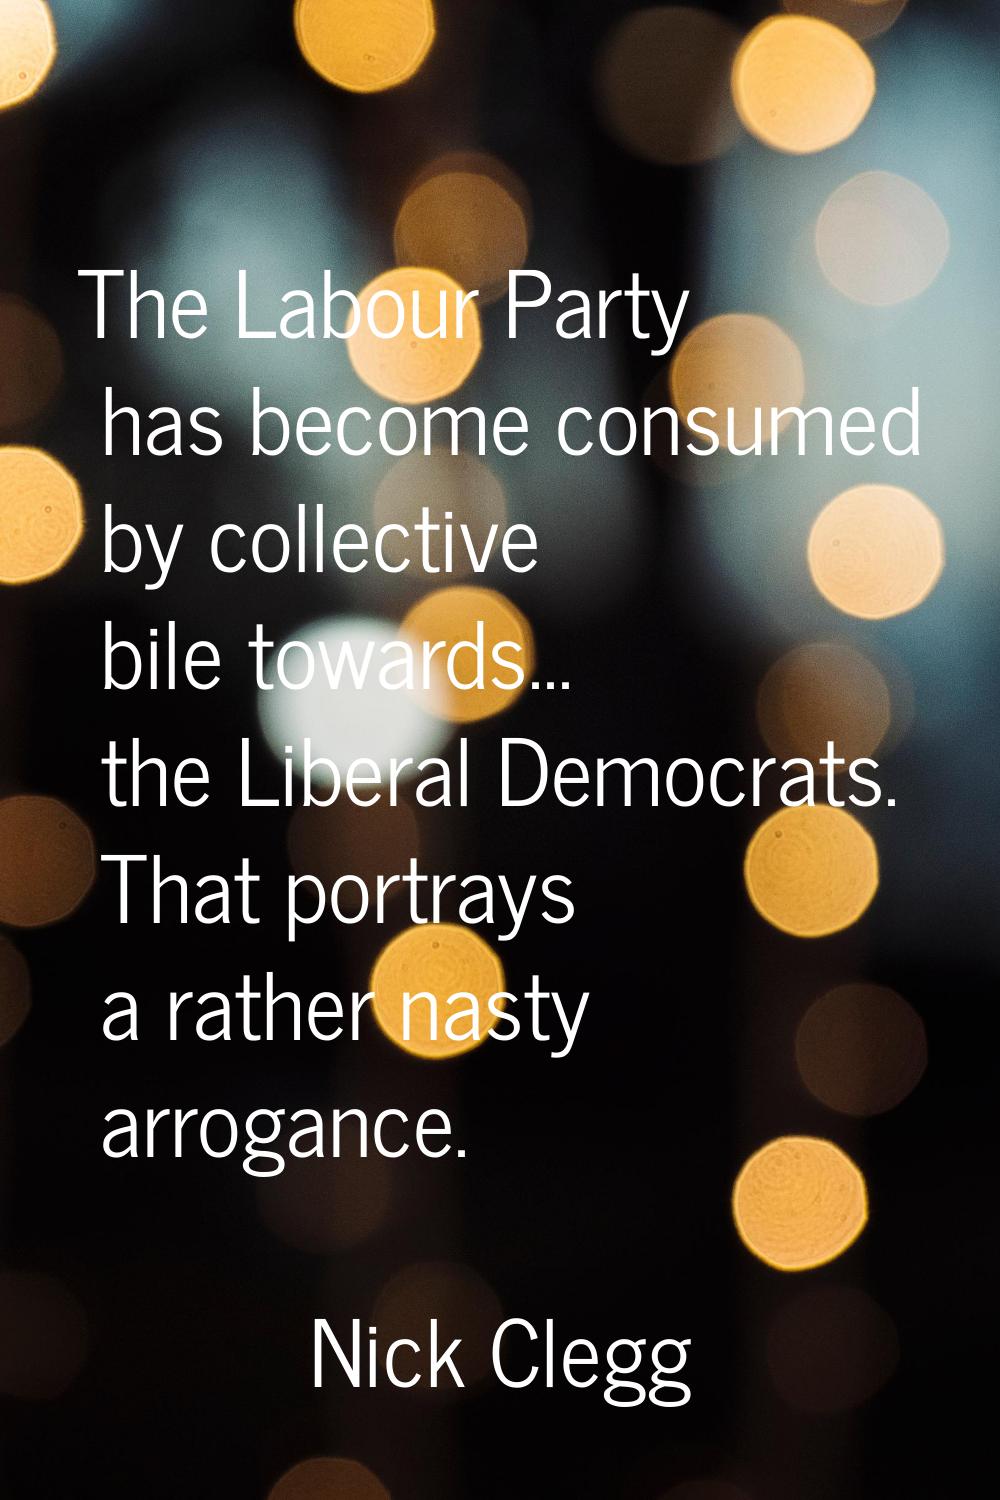 The Labour Party has become consumed by collective bile towards... the Liberal Democrats. That port